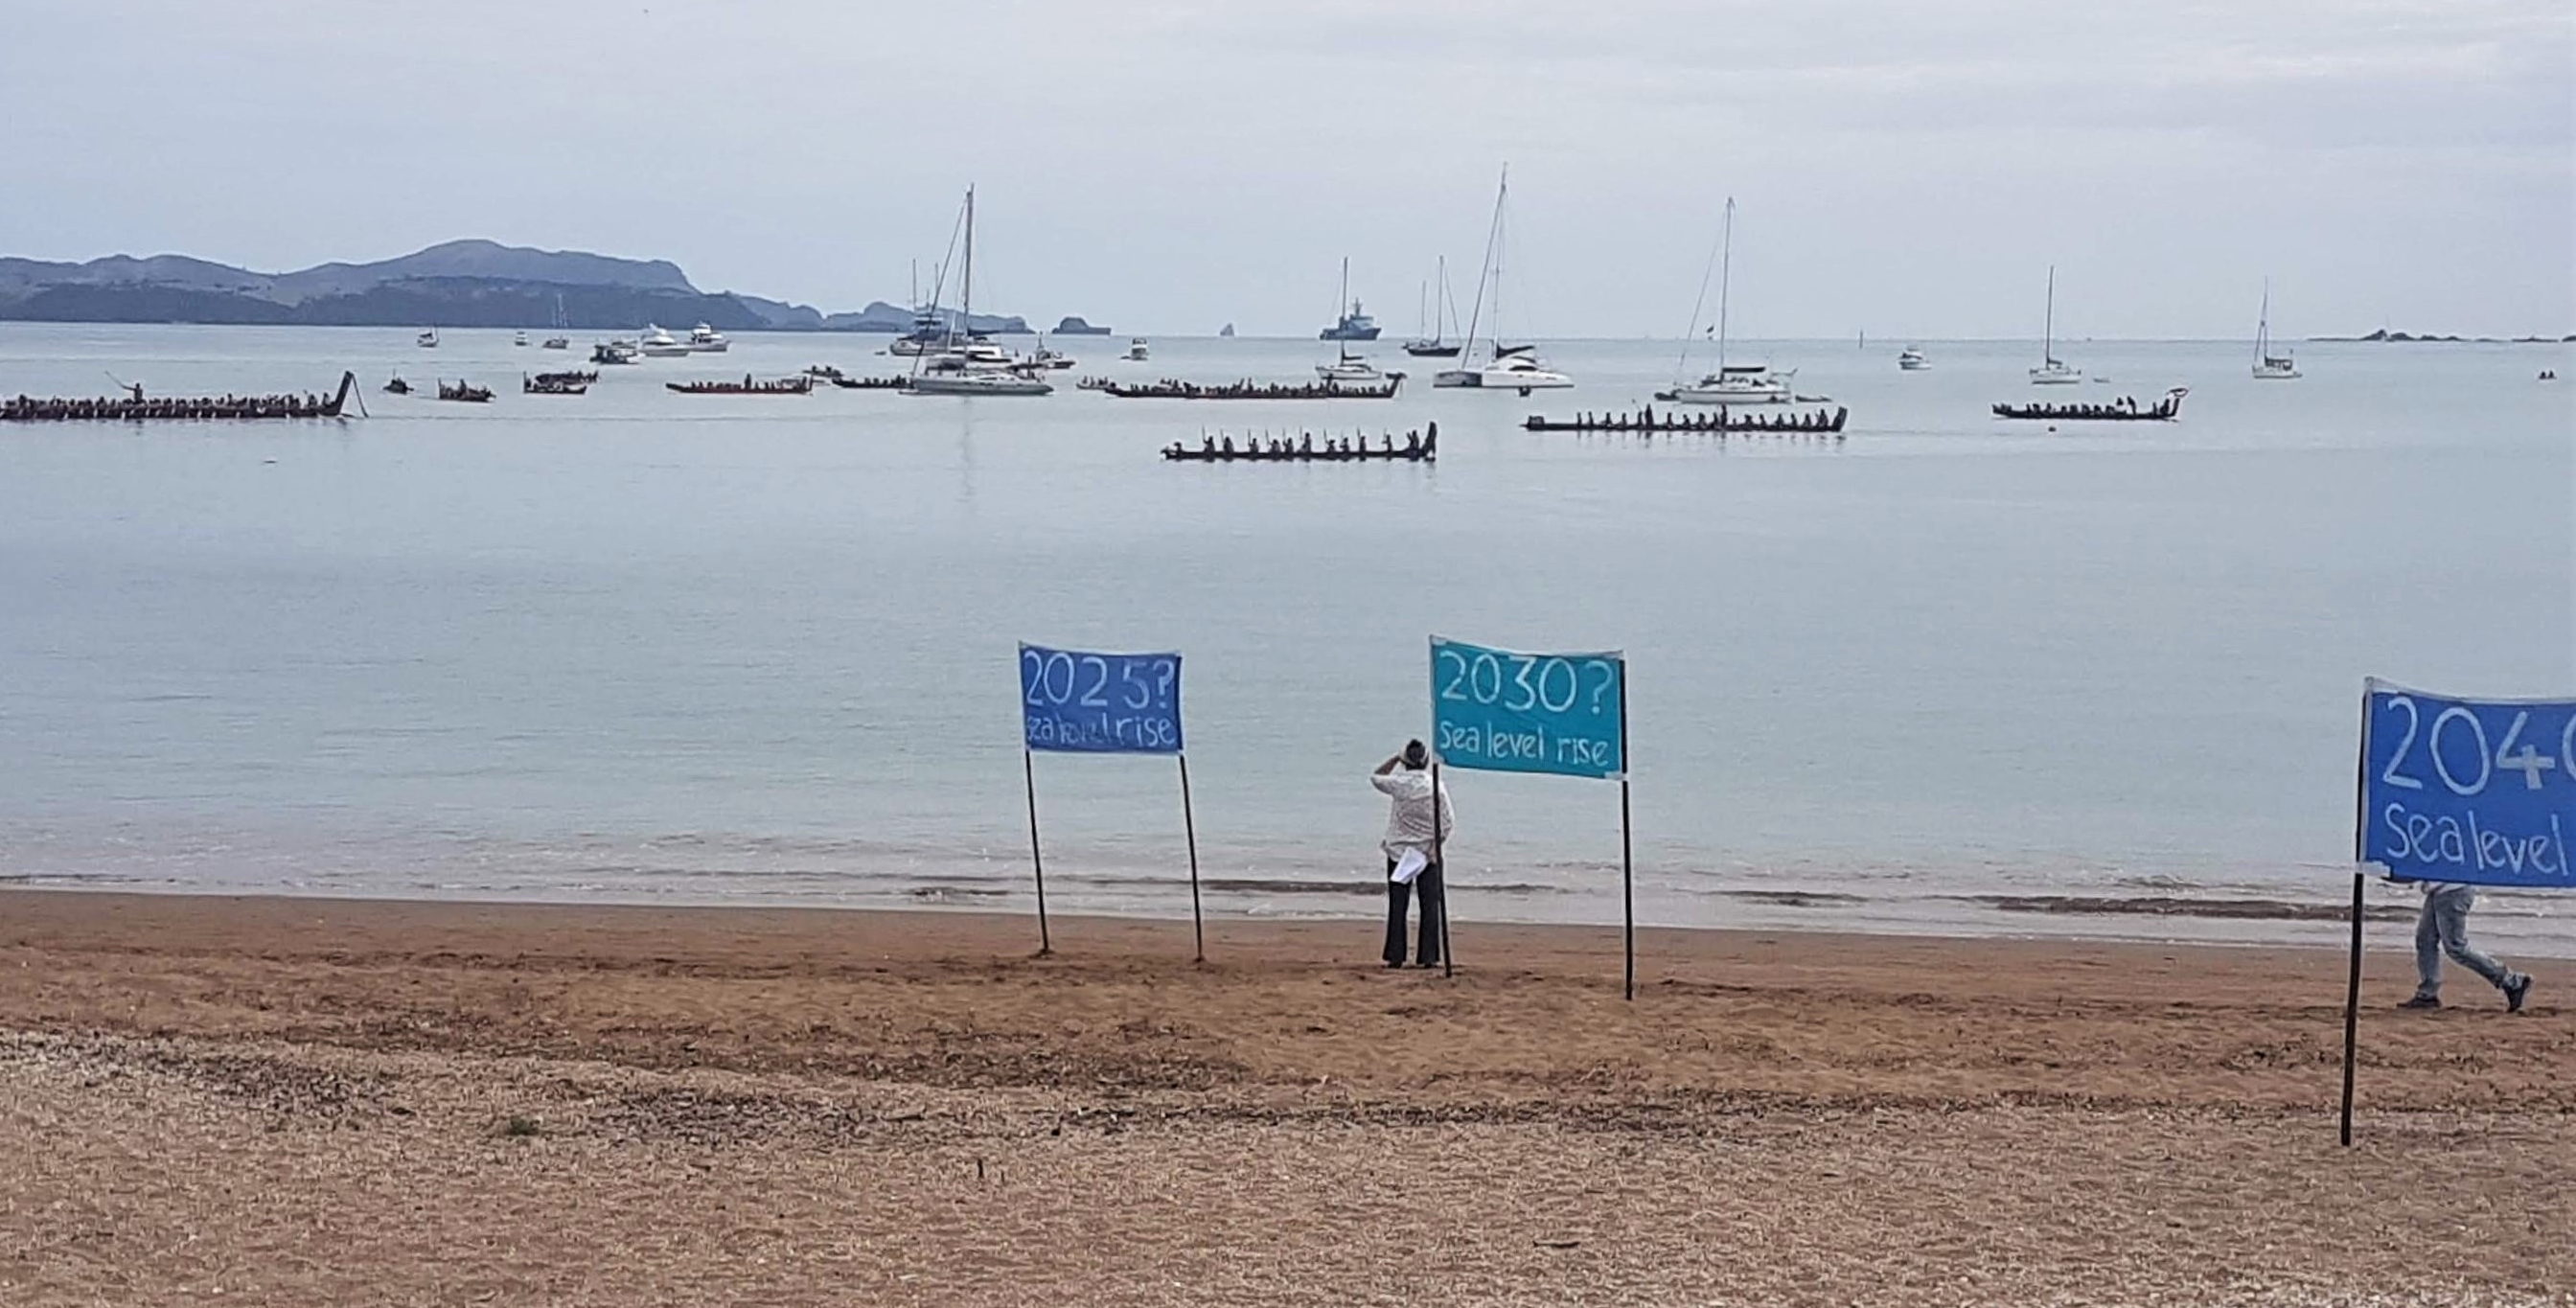 Banners placed by members of the public on the beach at Waitangi suggest possible sea level rise scenarios.